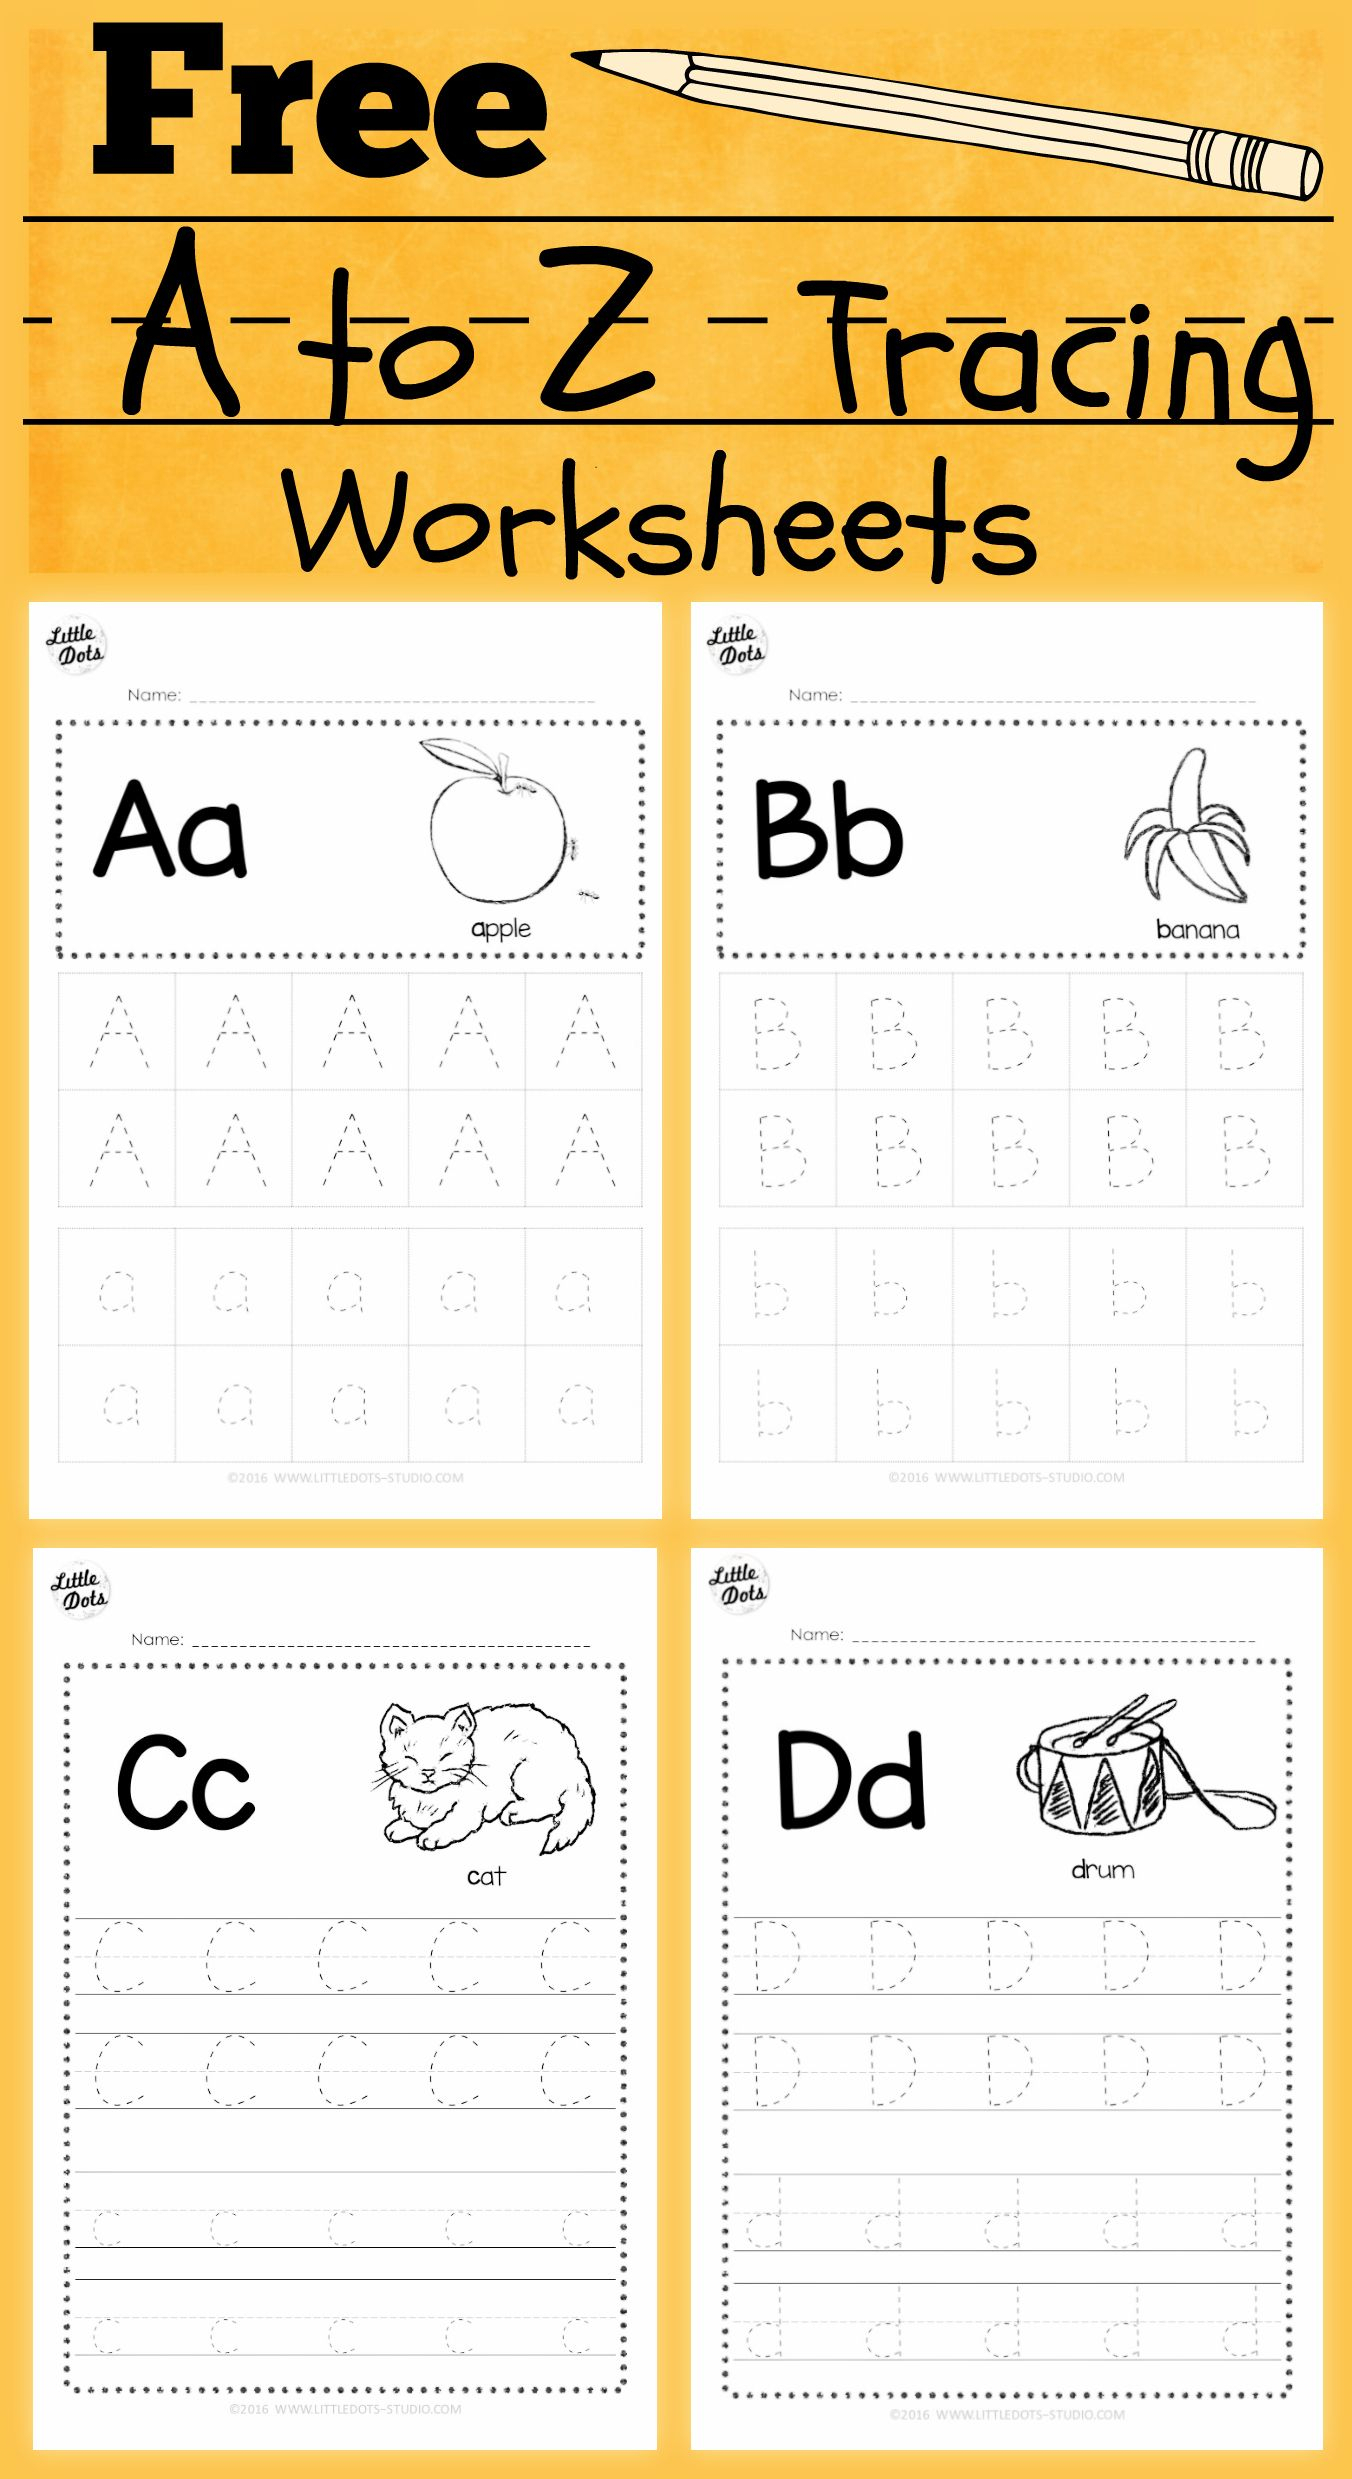 Download Free Alphabet Tracing Worksheets For Letter A To Z for Free Download Tracing Letters Worksheets